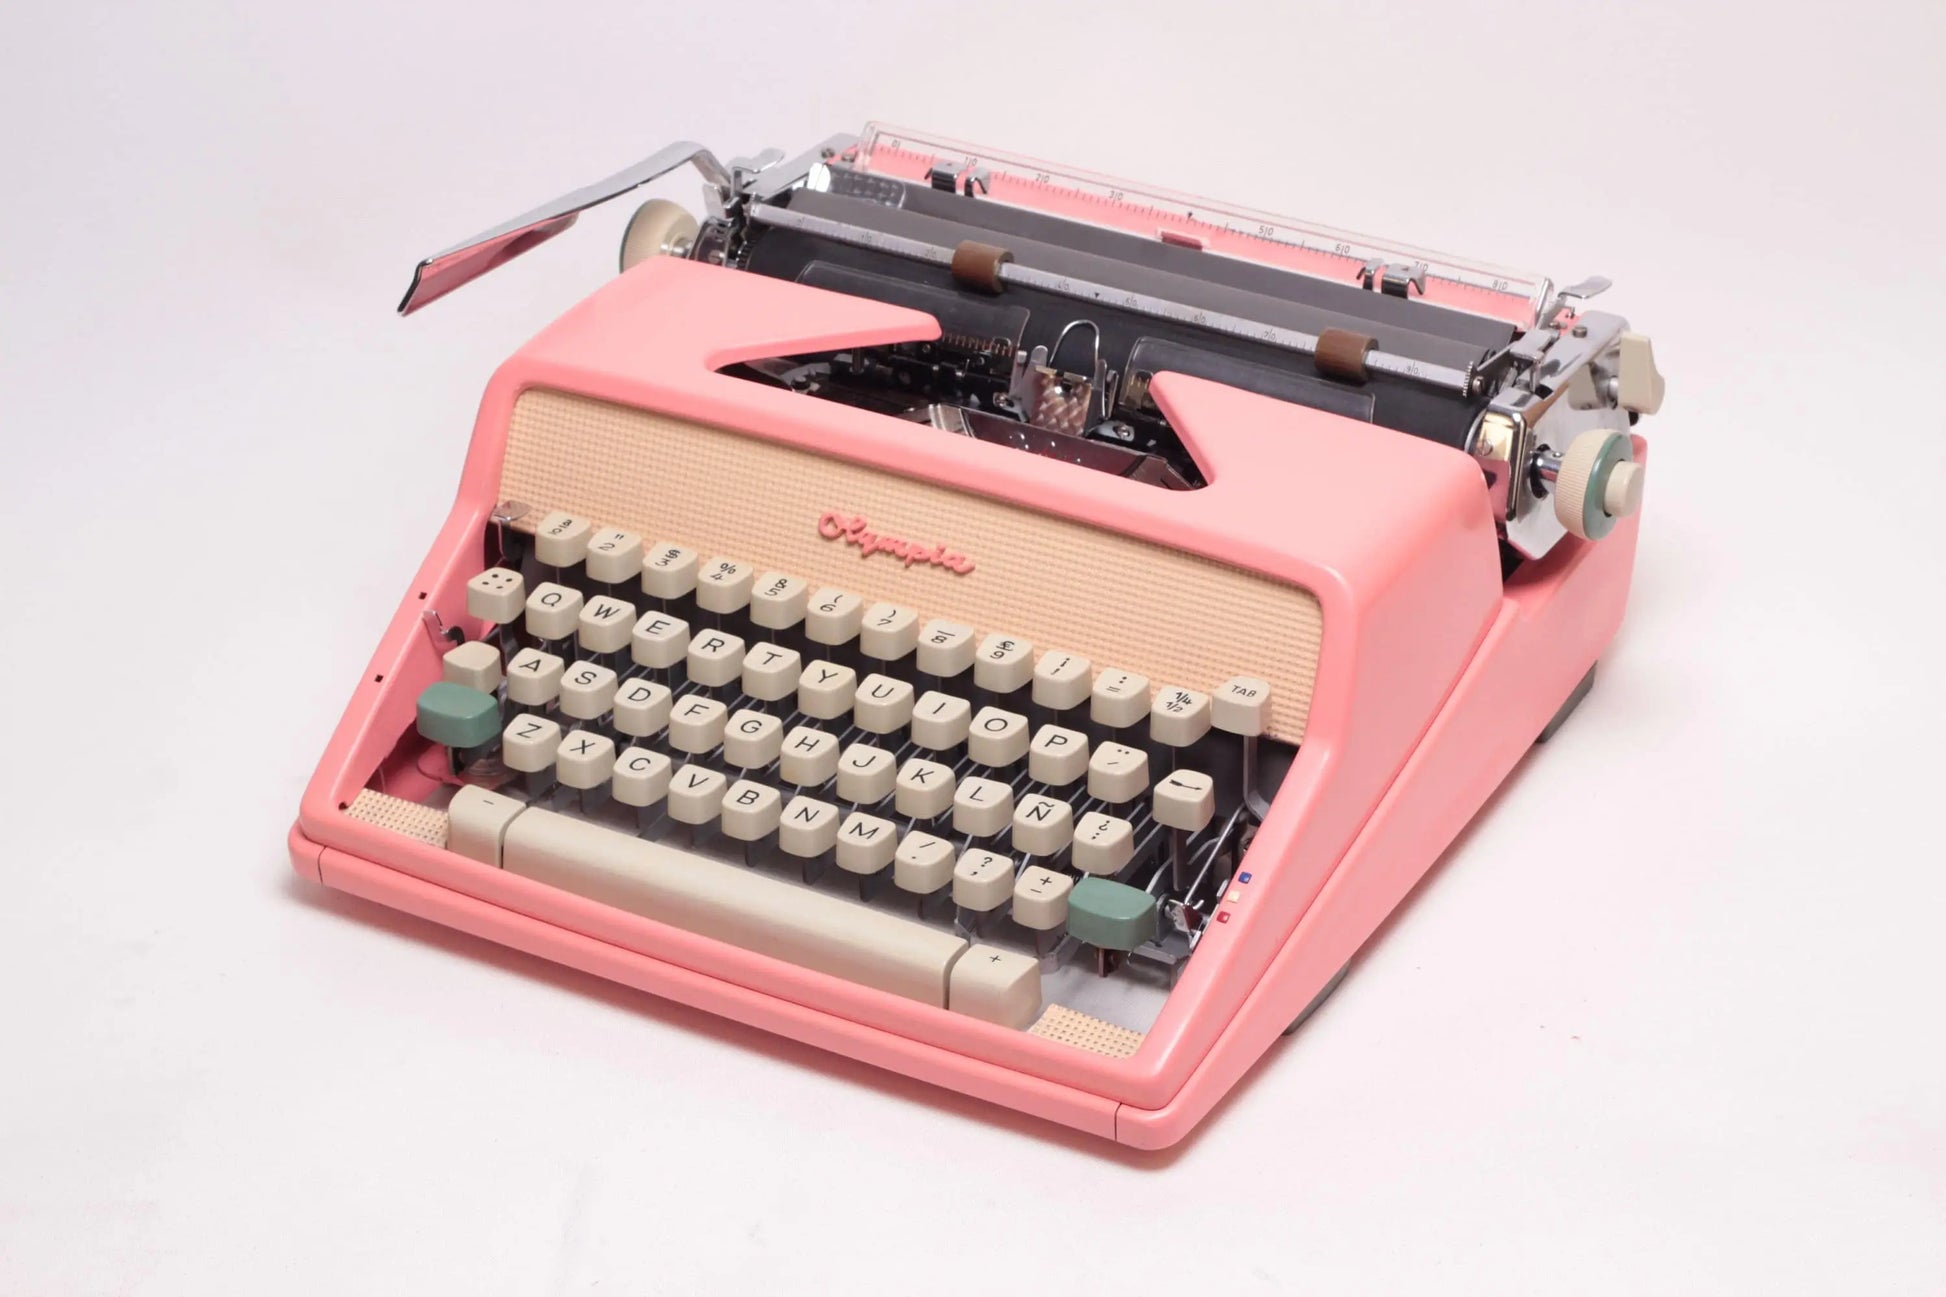 Olympia Monica SM7 Custom Pink Typewriter, Vintage, Mint Condition, Manual Portable, Professionally Serviced by Typewriter.Company - ElGranero Typewriter.Company